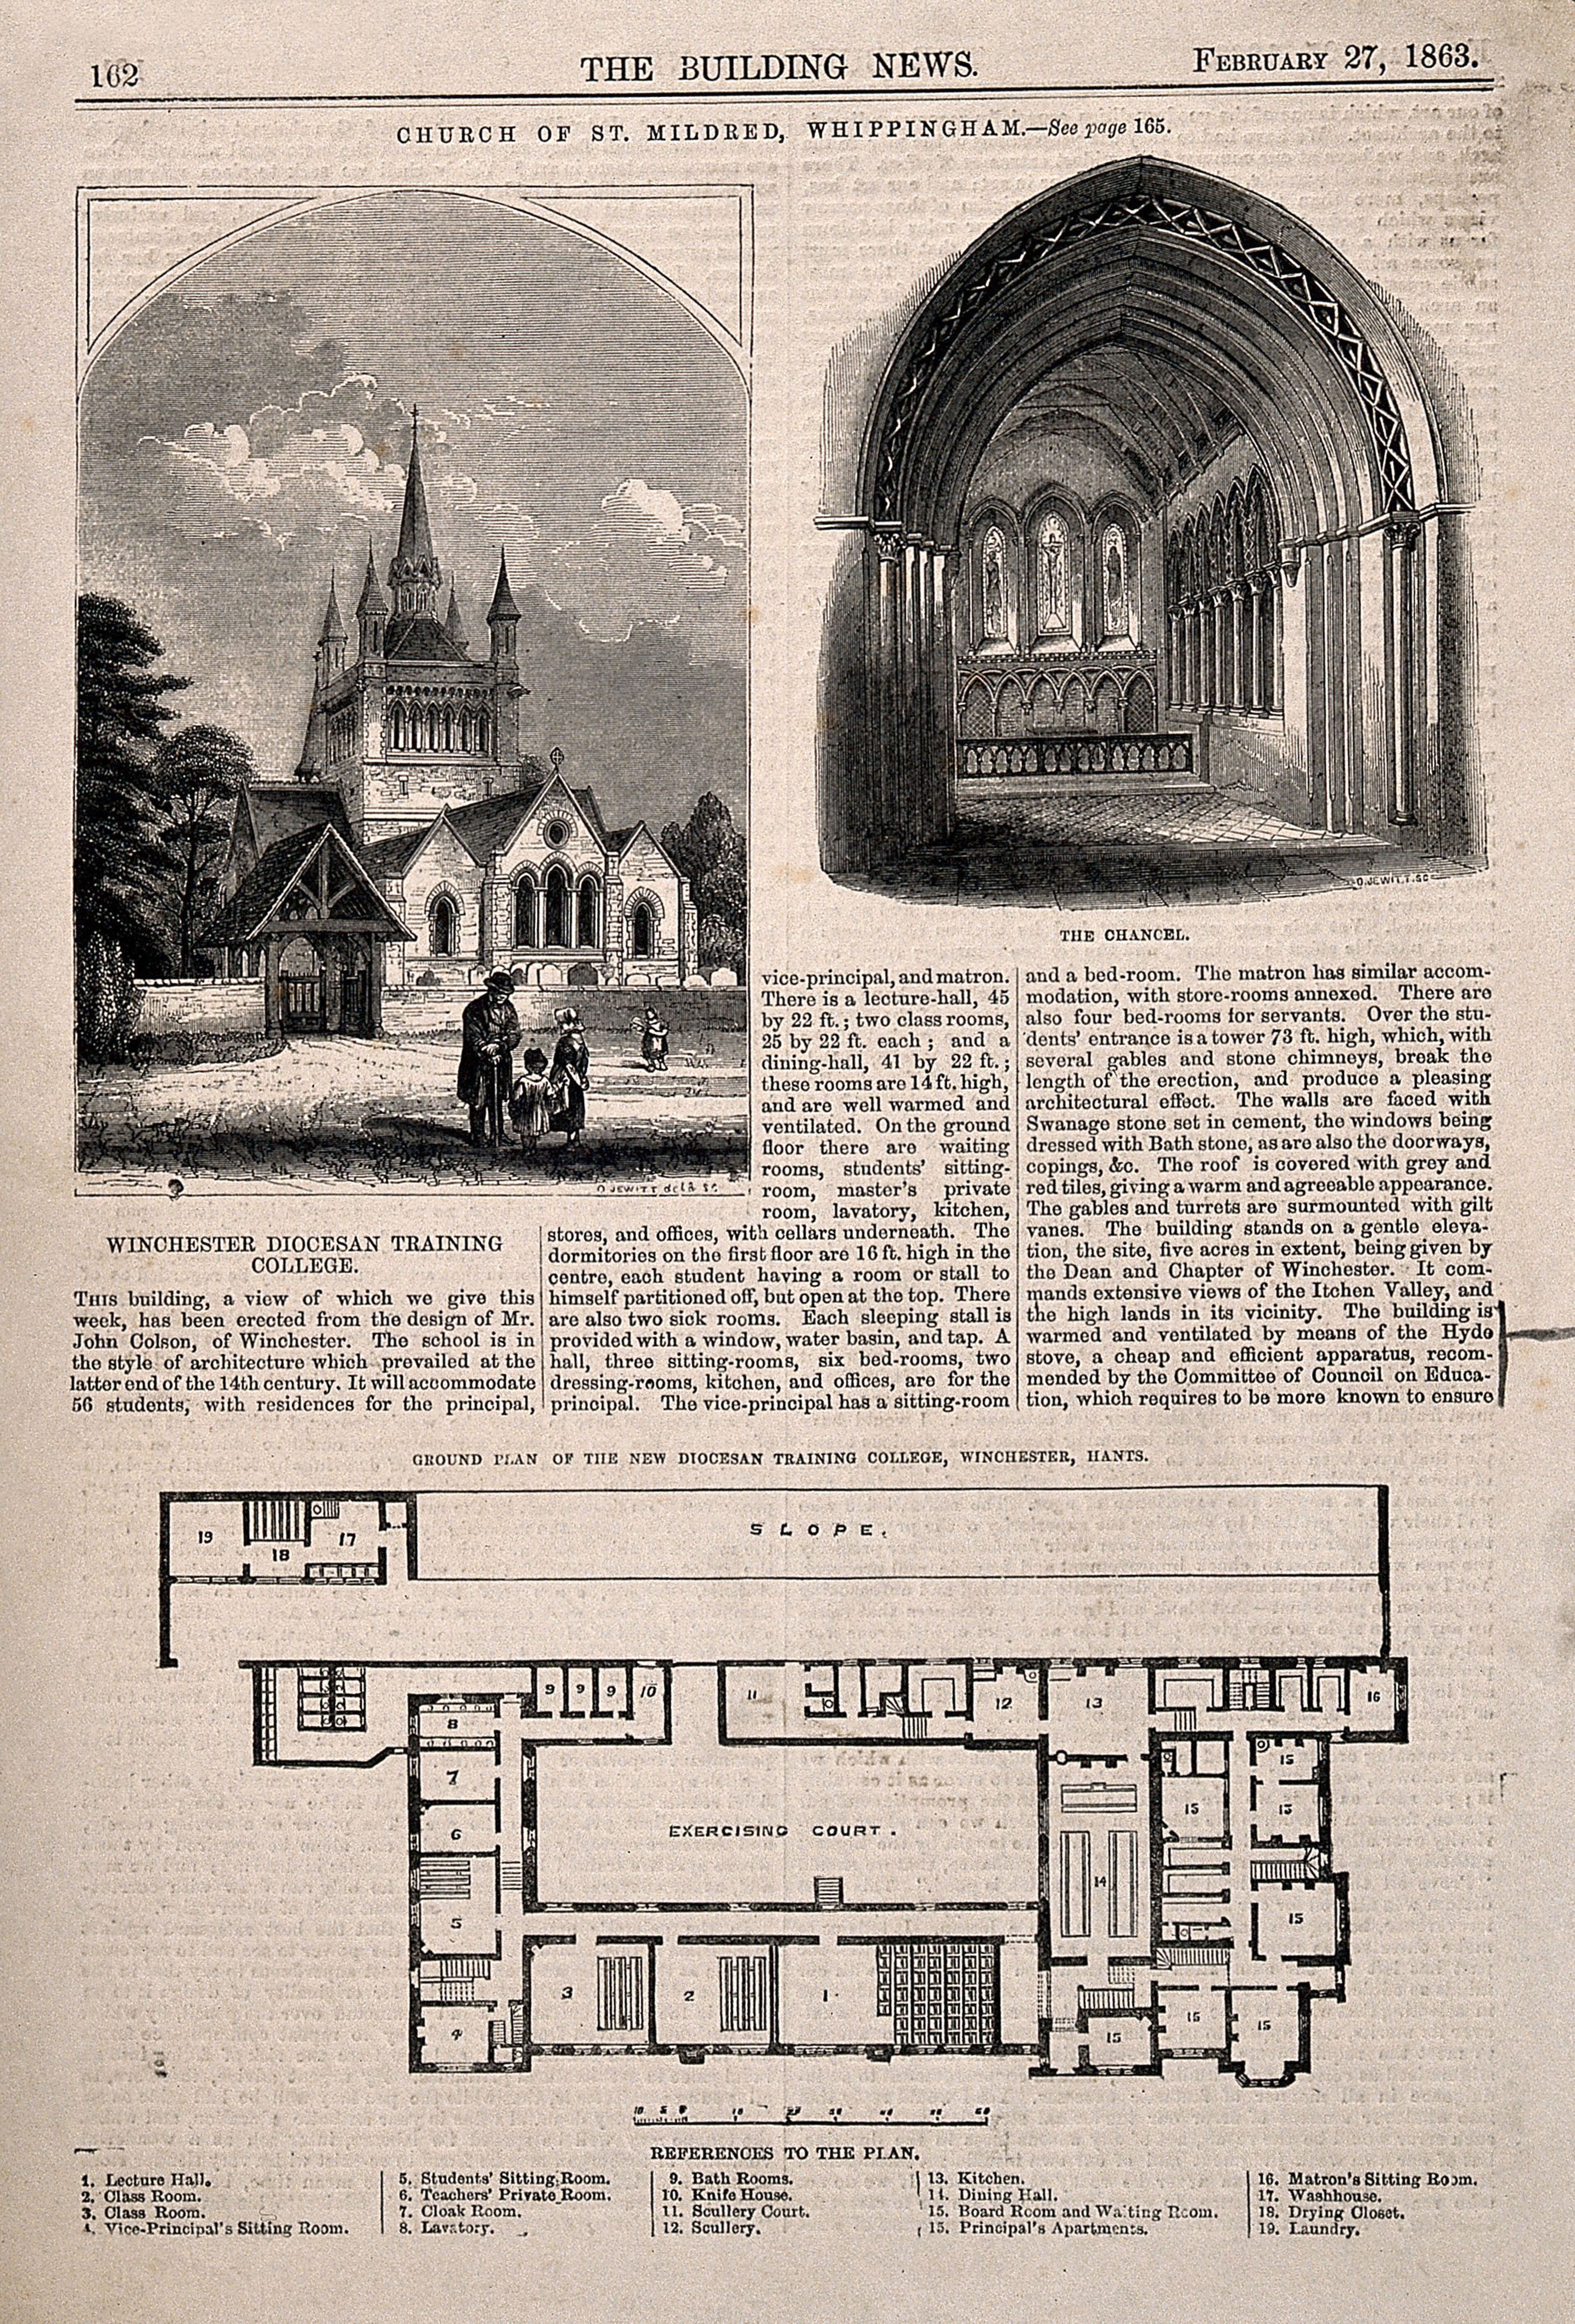 Church of St. Mildred, Whippingham: Winchester Diocesan Training College floor plan. Wood engraving by O. Jewitt, 1863.